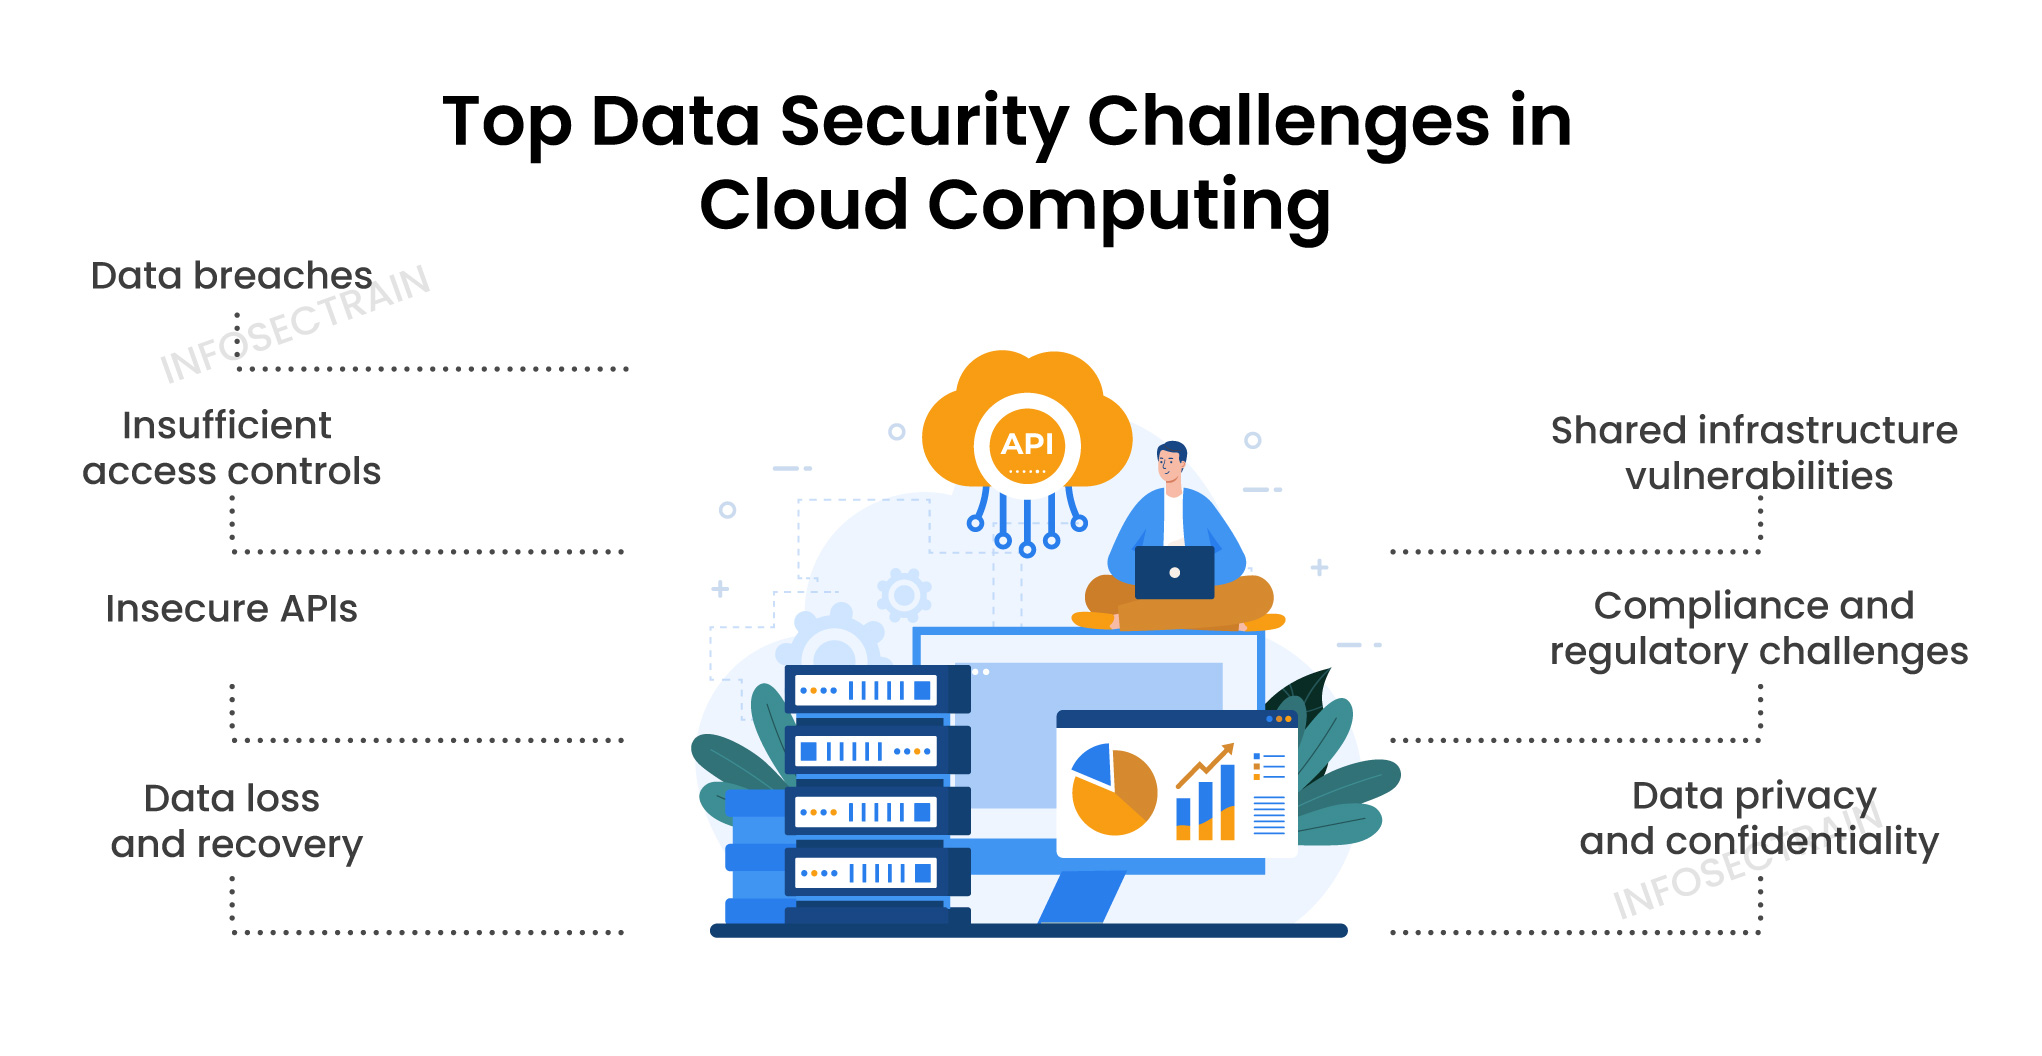 Top Data Security Challenges in Cloud Computing